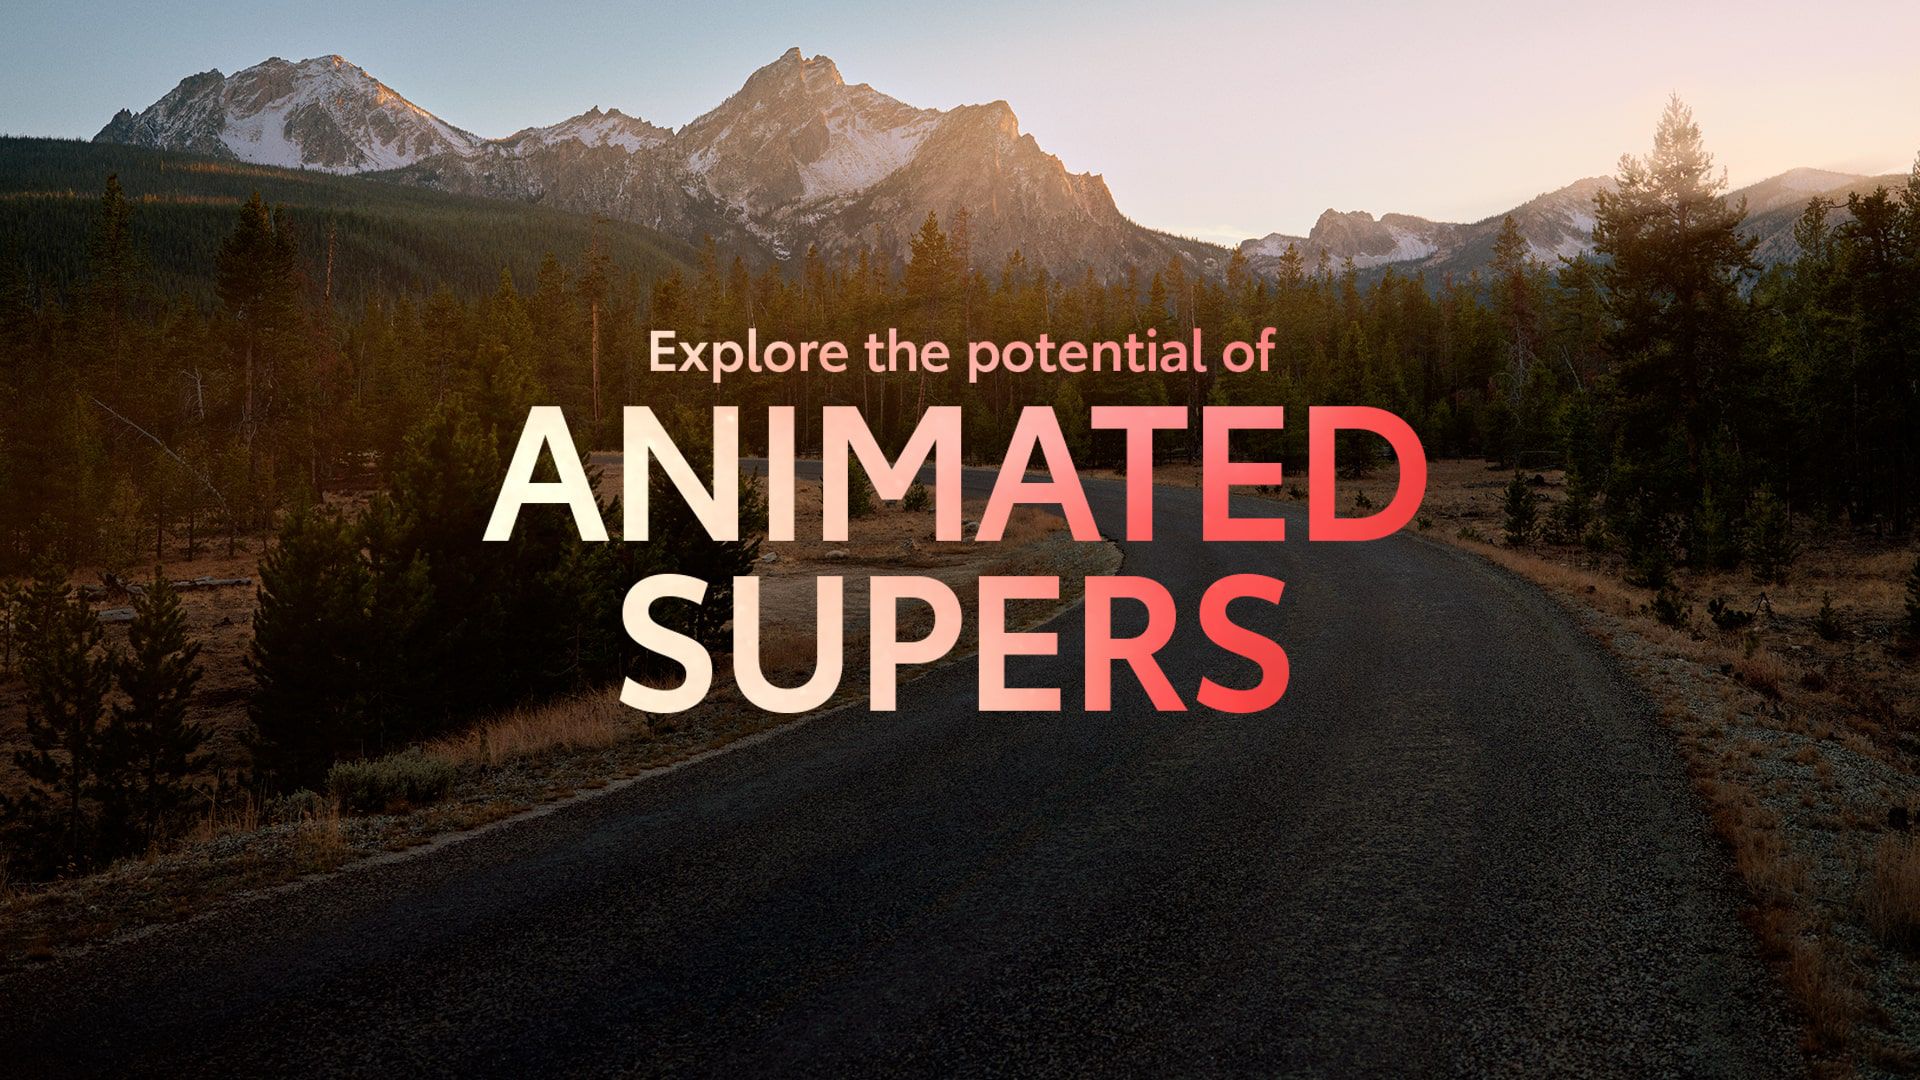 An image of a mountain range with the super “Explore the potential of ANIMATED SUPERS.”